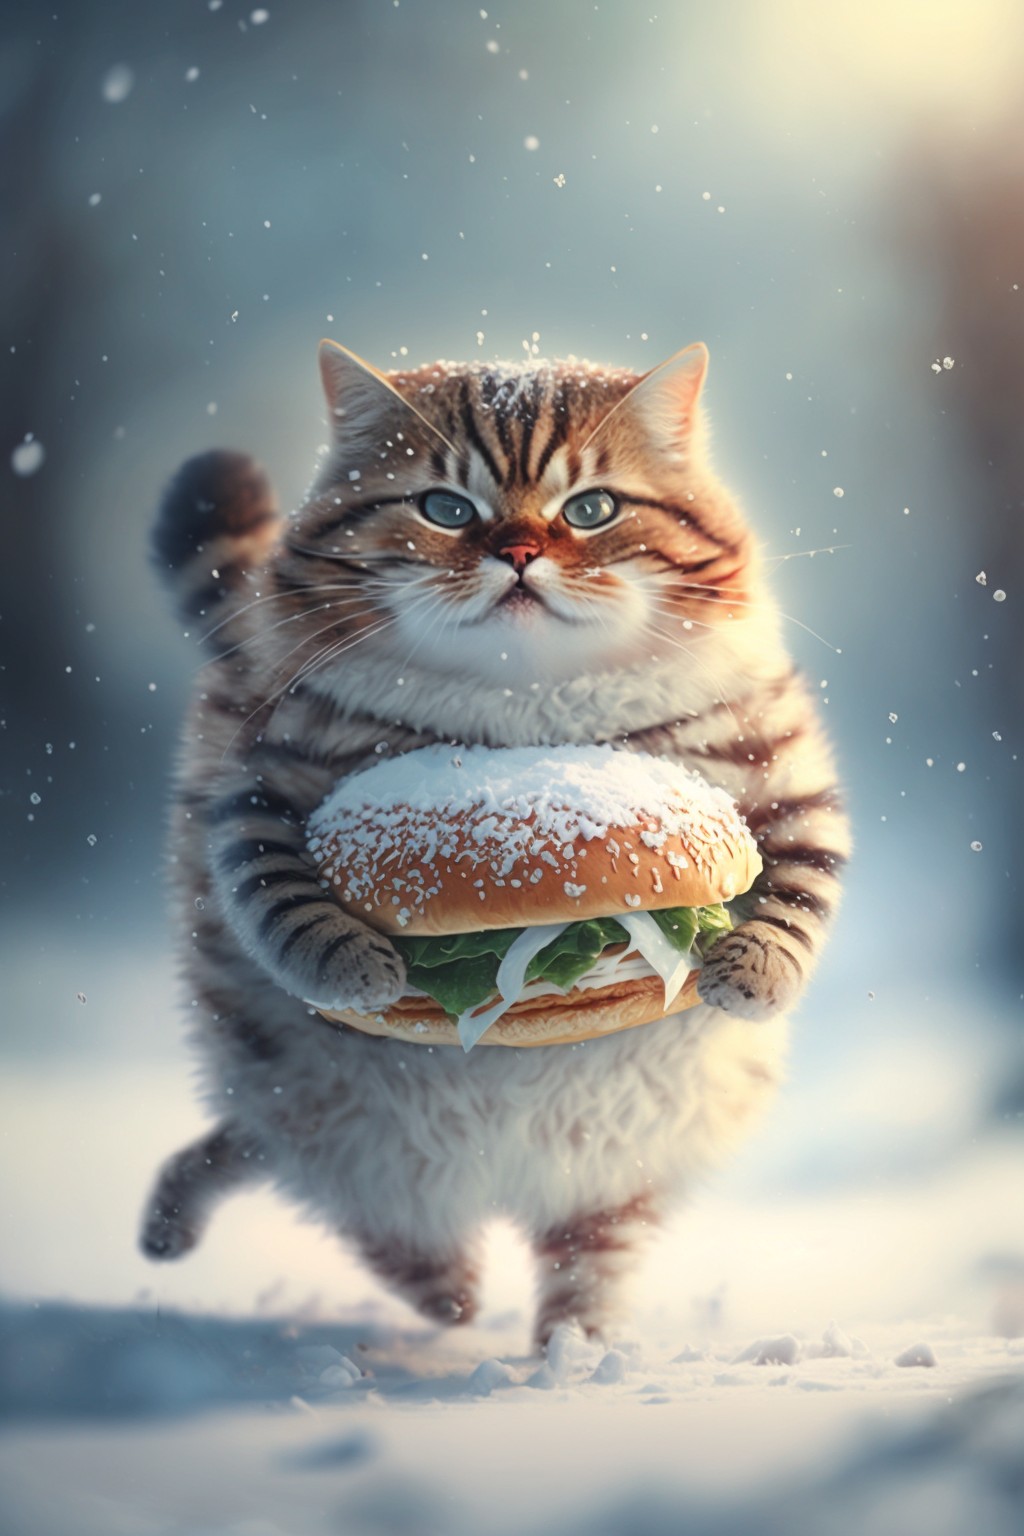 Fat cat running in the snow holding a hamburger